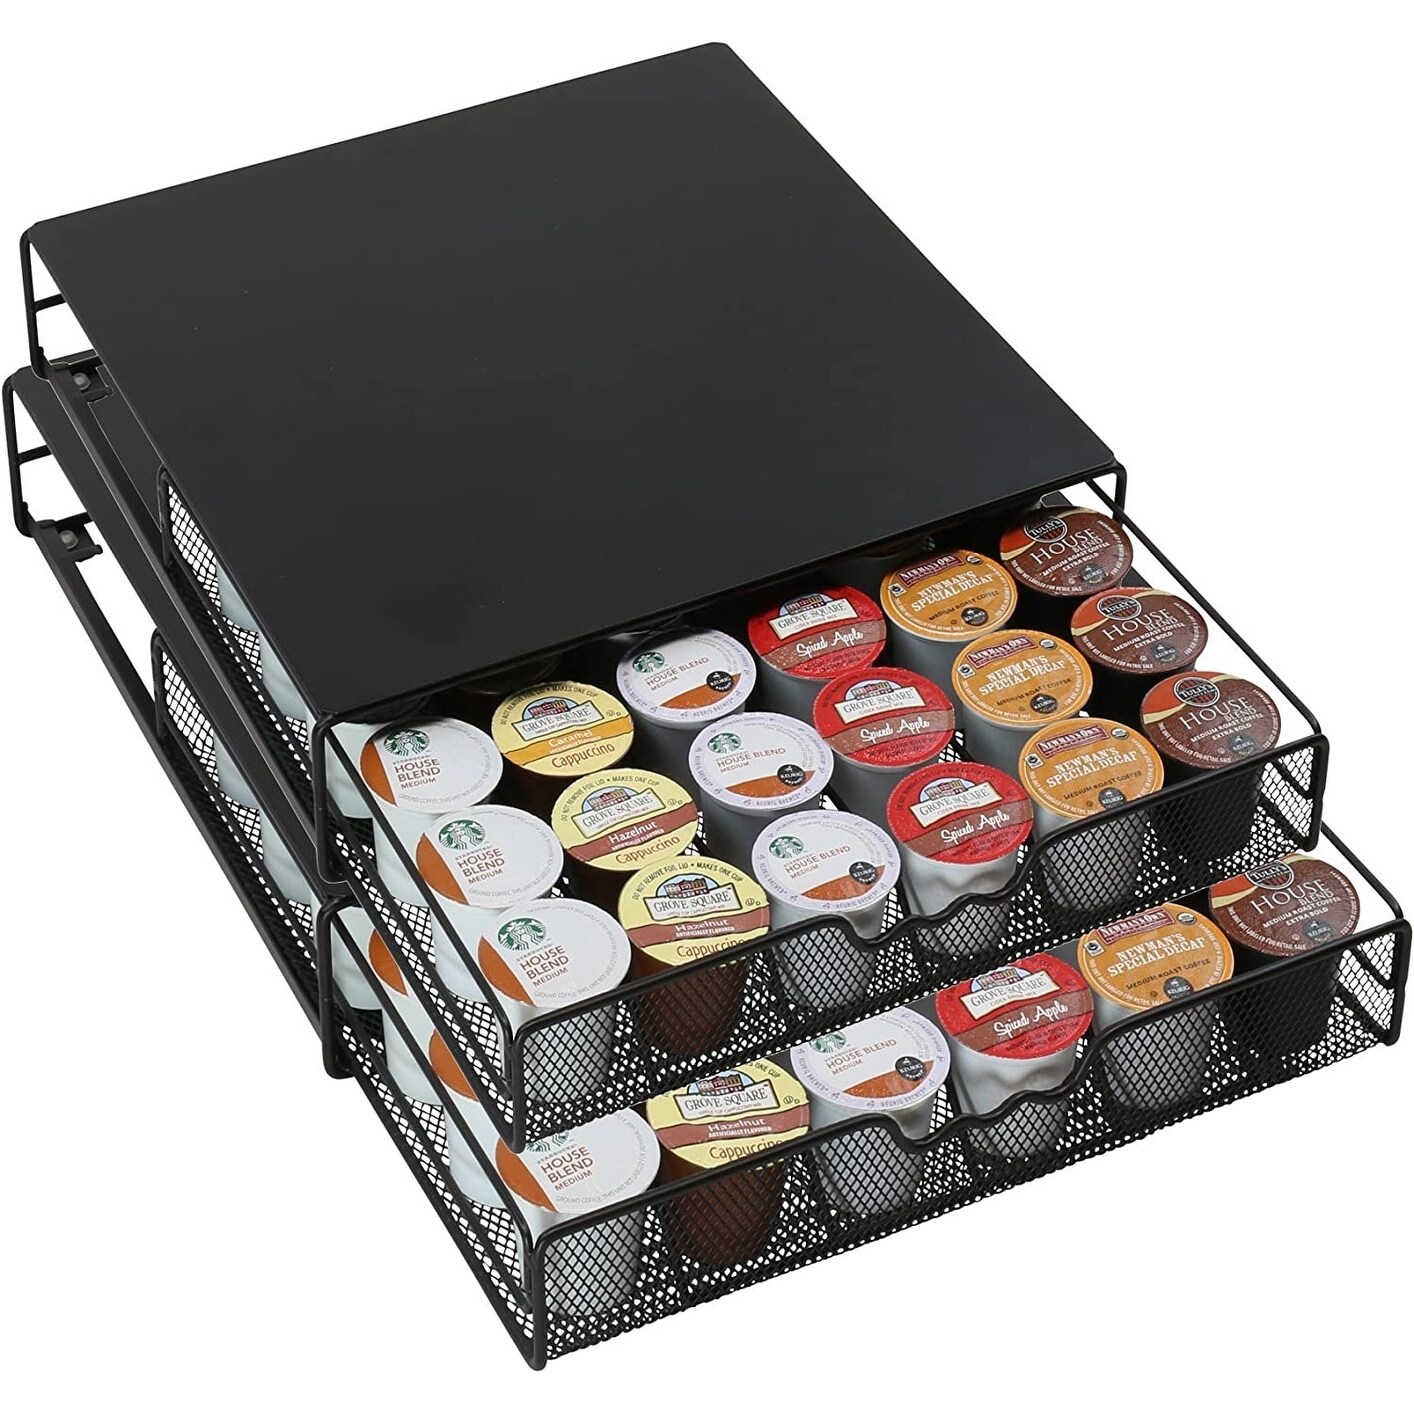 https://ak1.ostkcdn.com/images/products/is/images/direct/026049d77884994339c583a8fe0e03646b0ec5c3/DecoBros-K-cup-Storage-Drawer-Holder.jpg